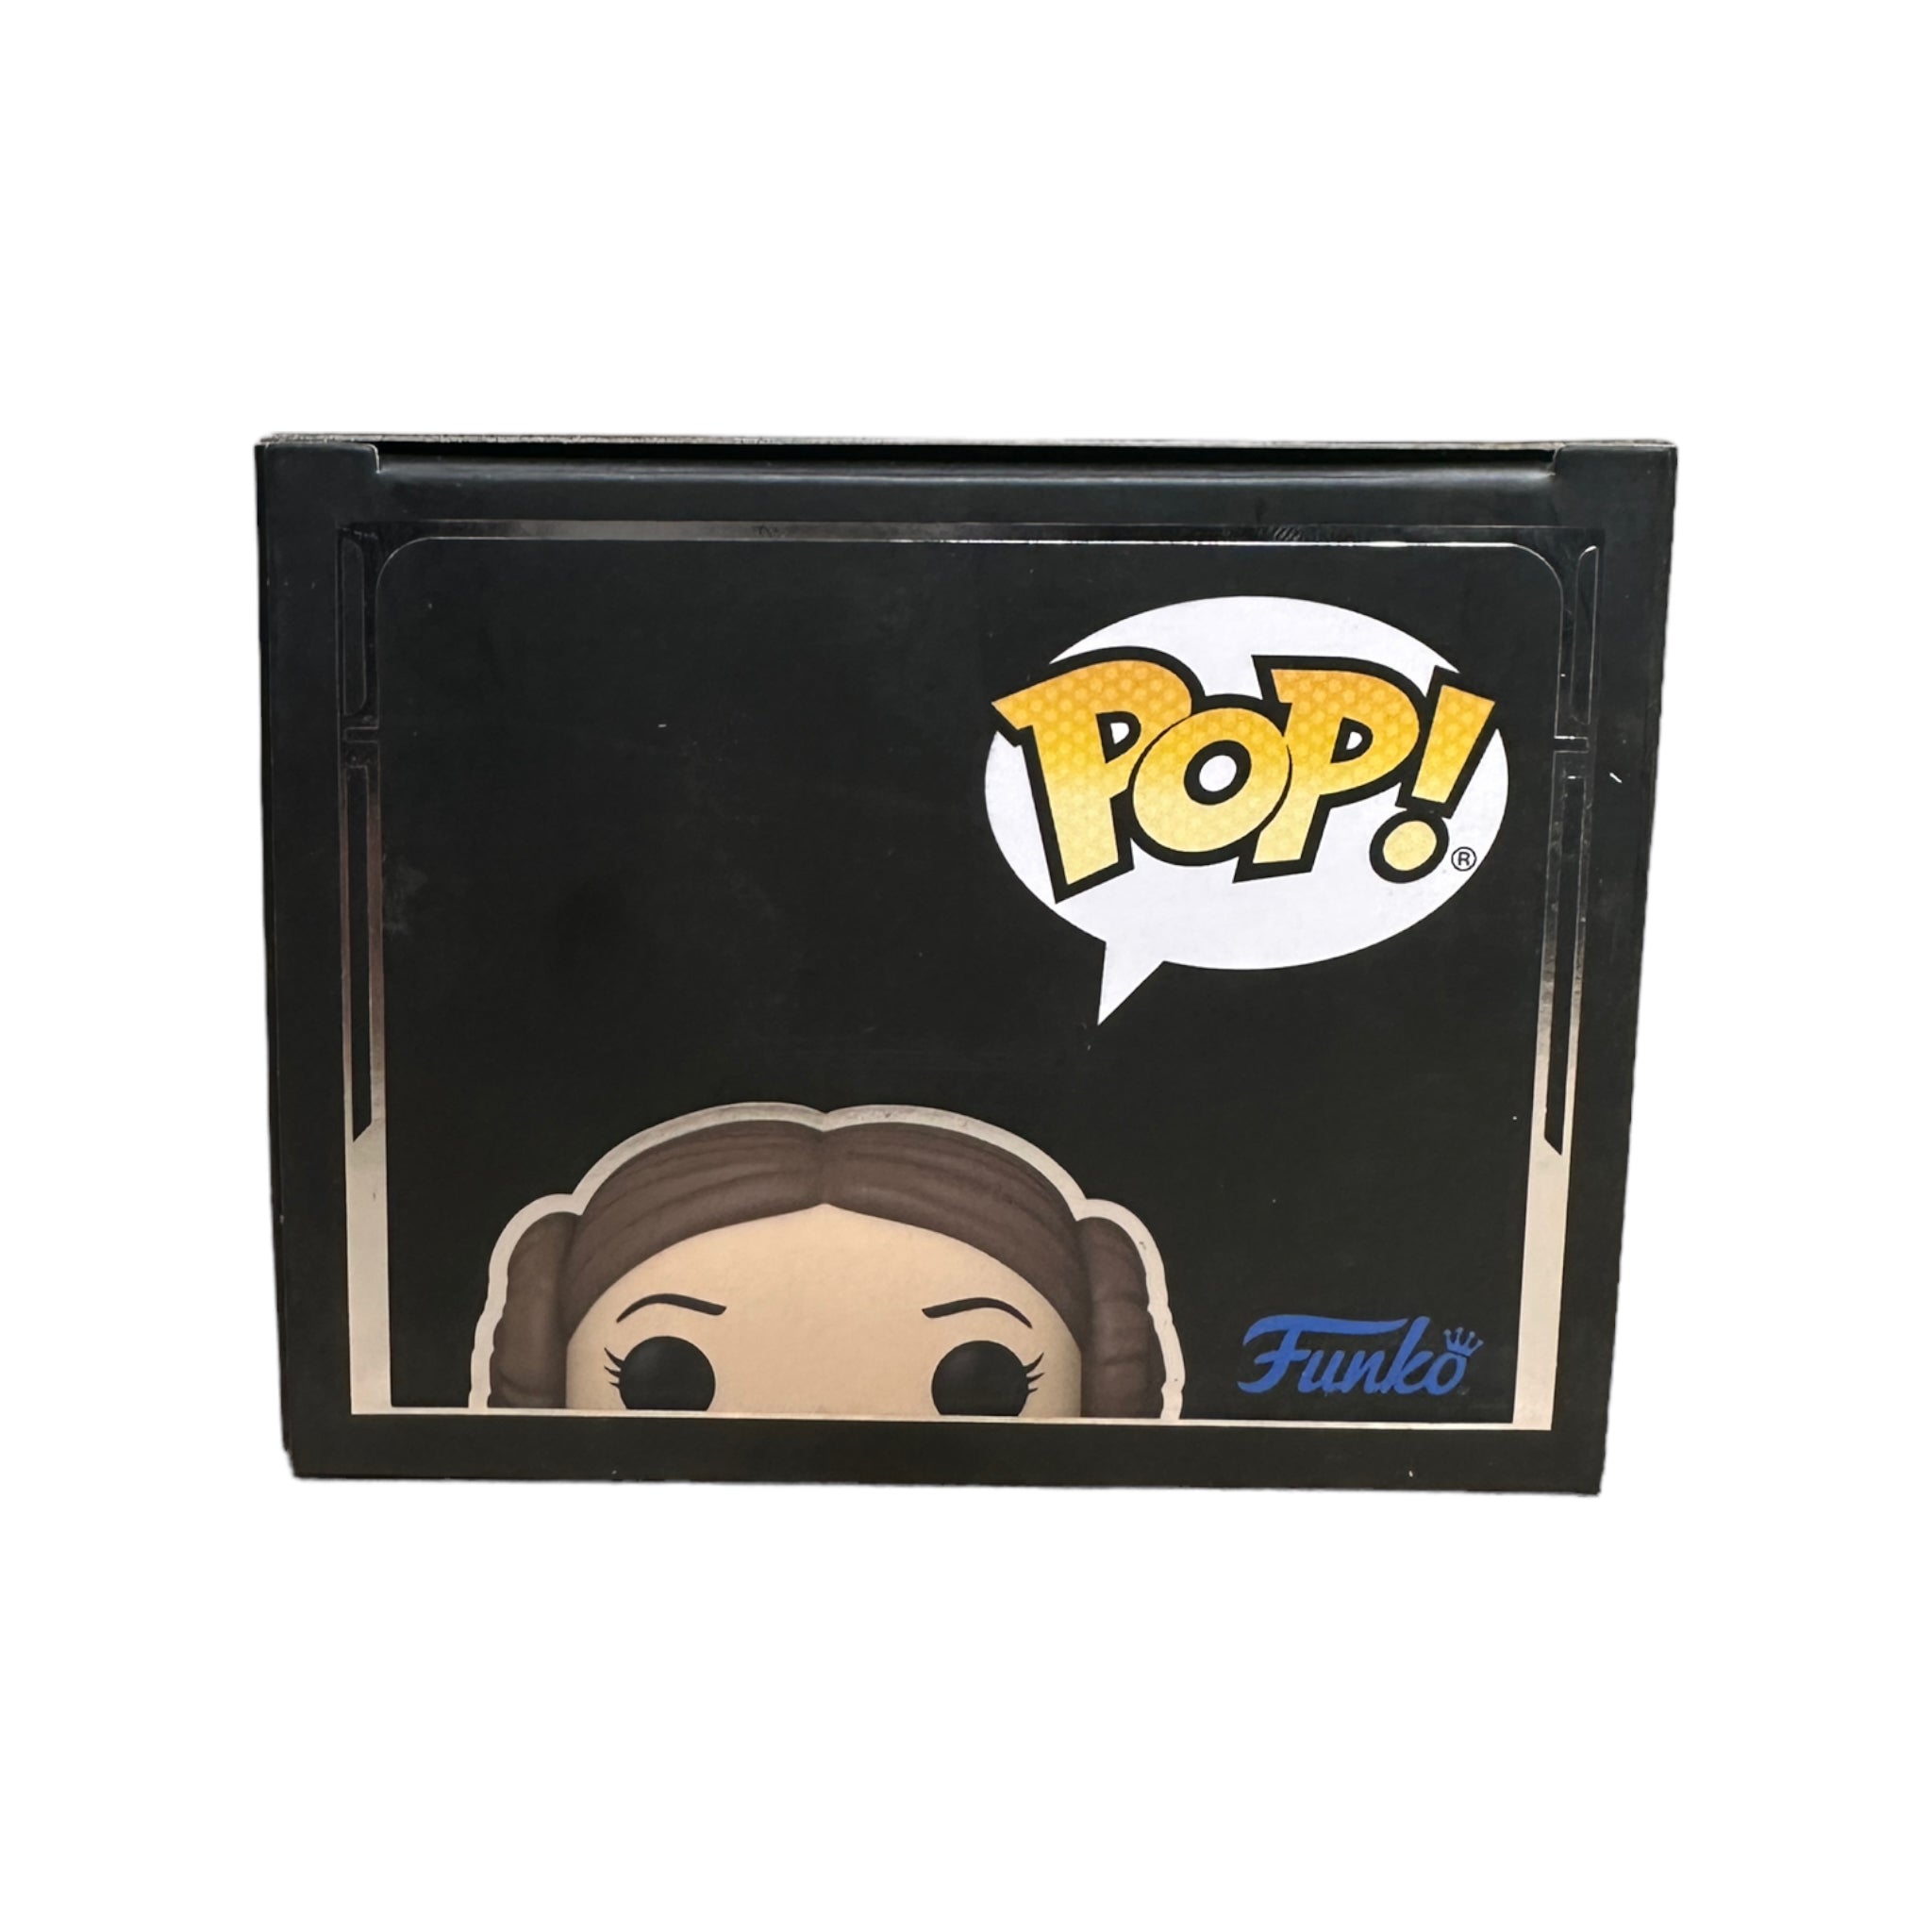 Princess Leia #512 Funko Pop! - Star Wars - Galactic Convention 2022 Exclusive - Condition 8.75/10